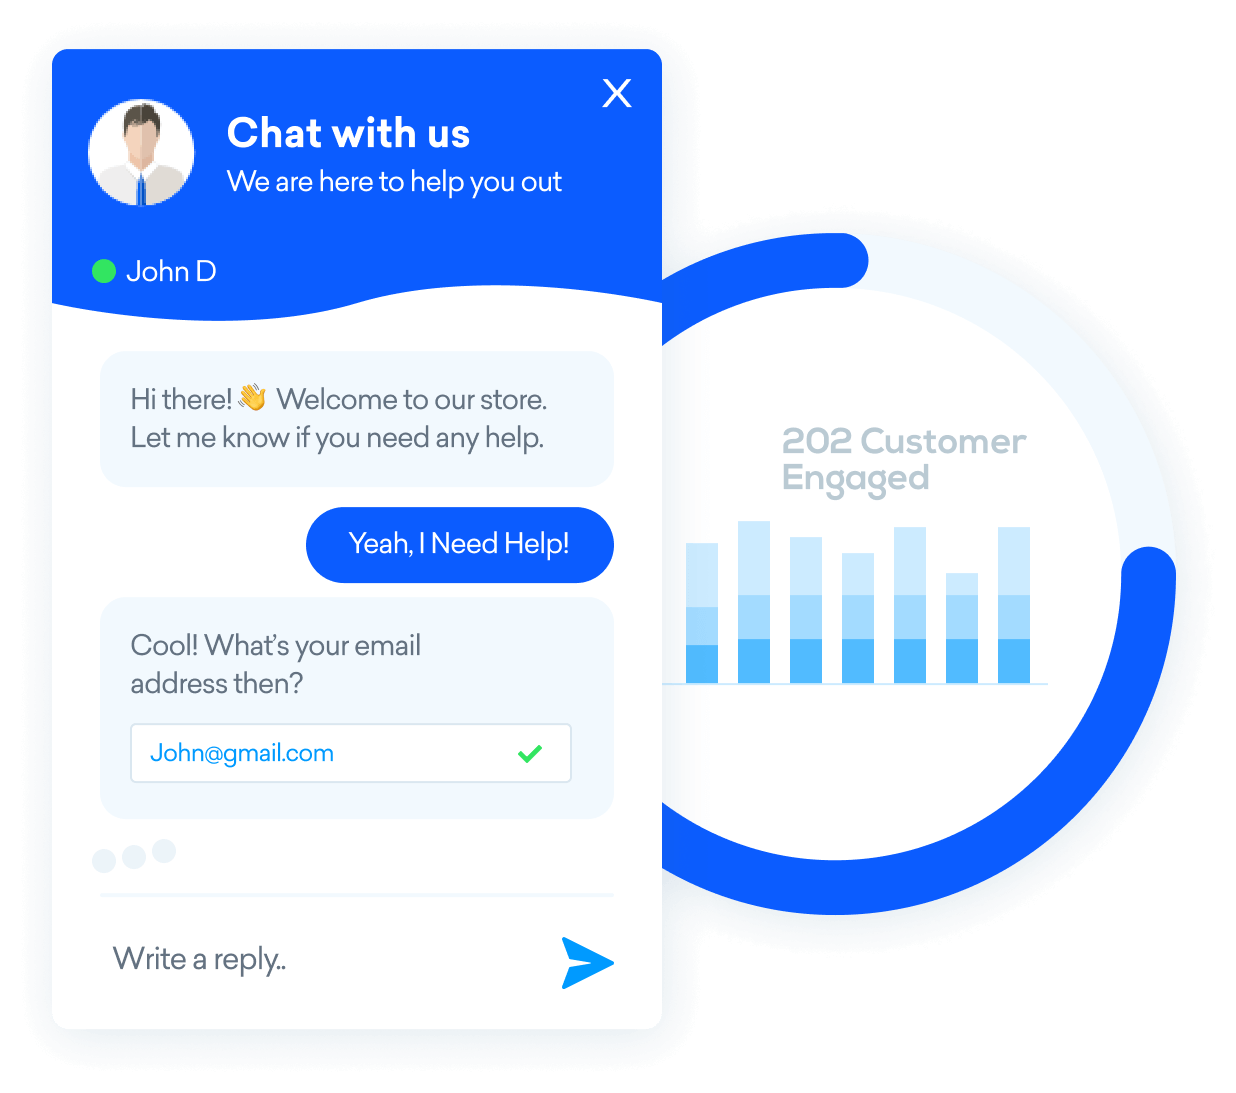 Live chat is the quickest and the most efficient way to engage customers